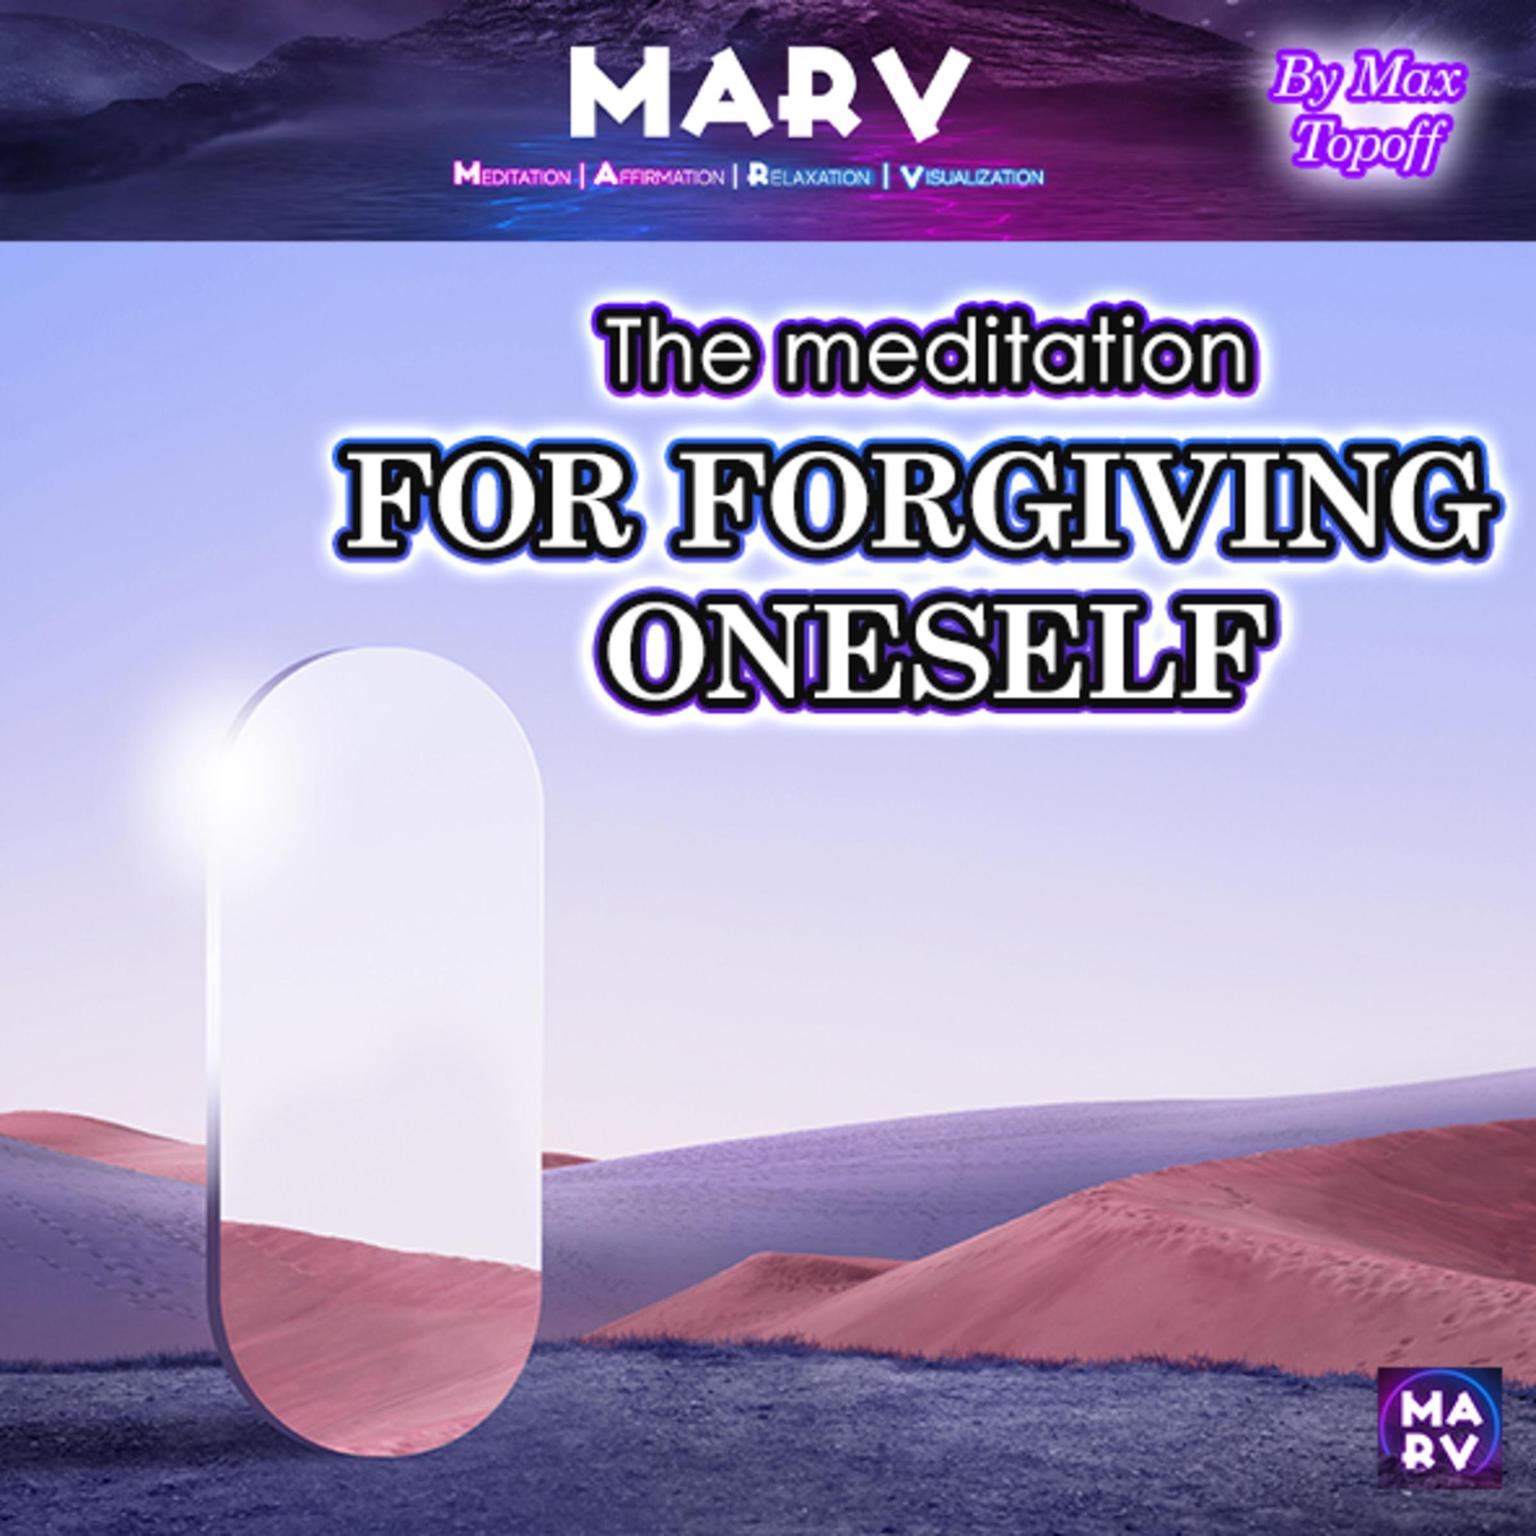 The Meditation For Forgiving Oneself Audiobook, by Max Topoff